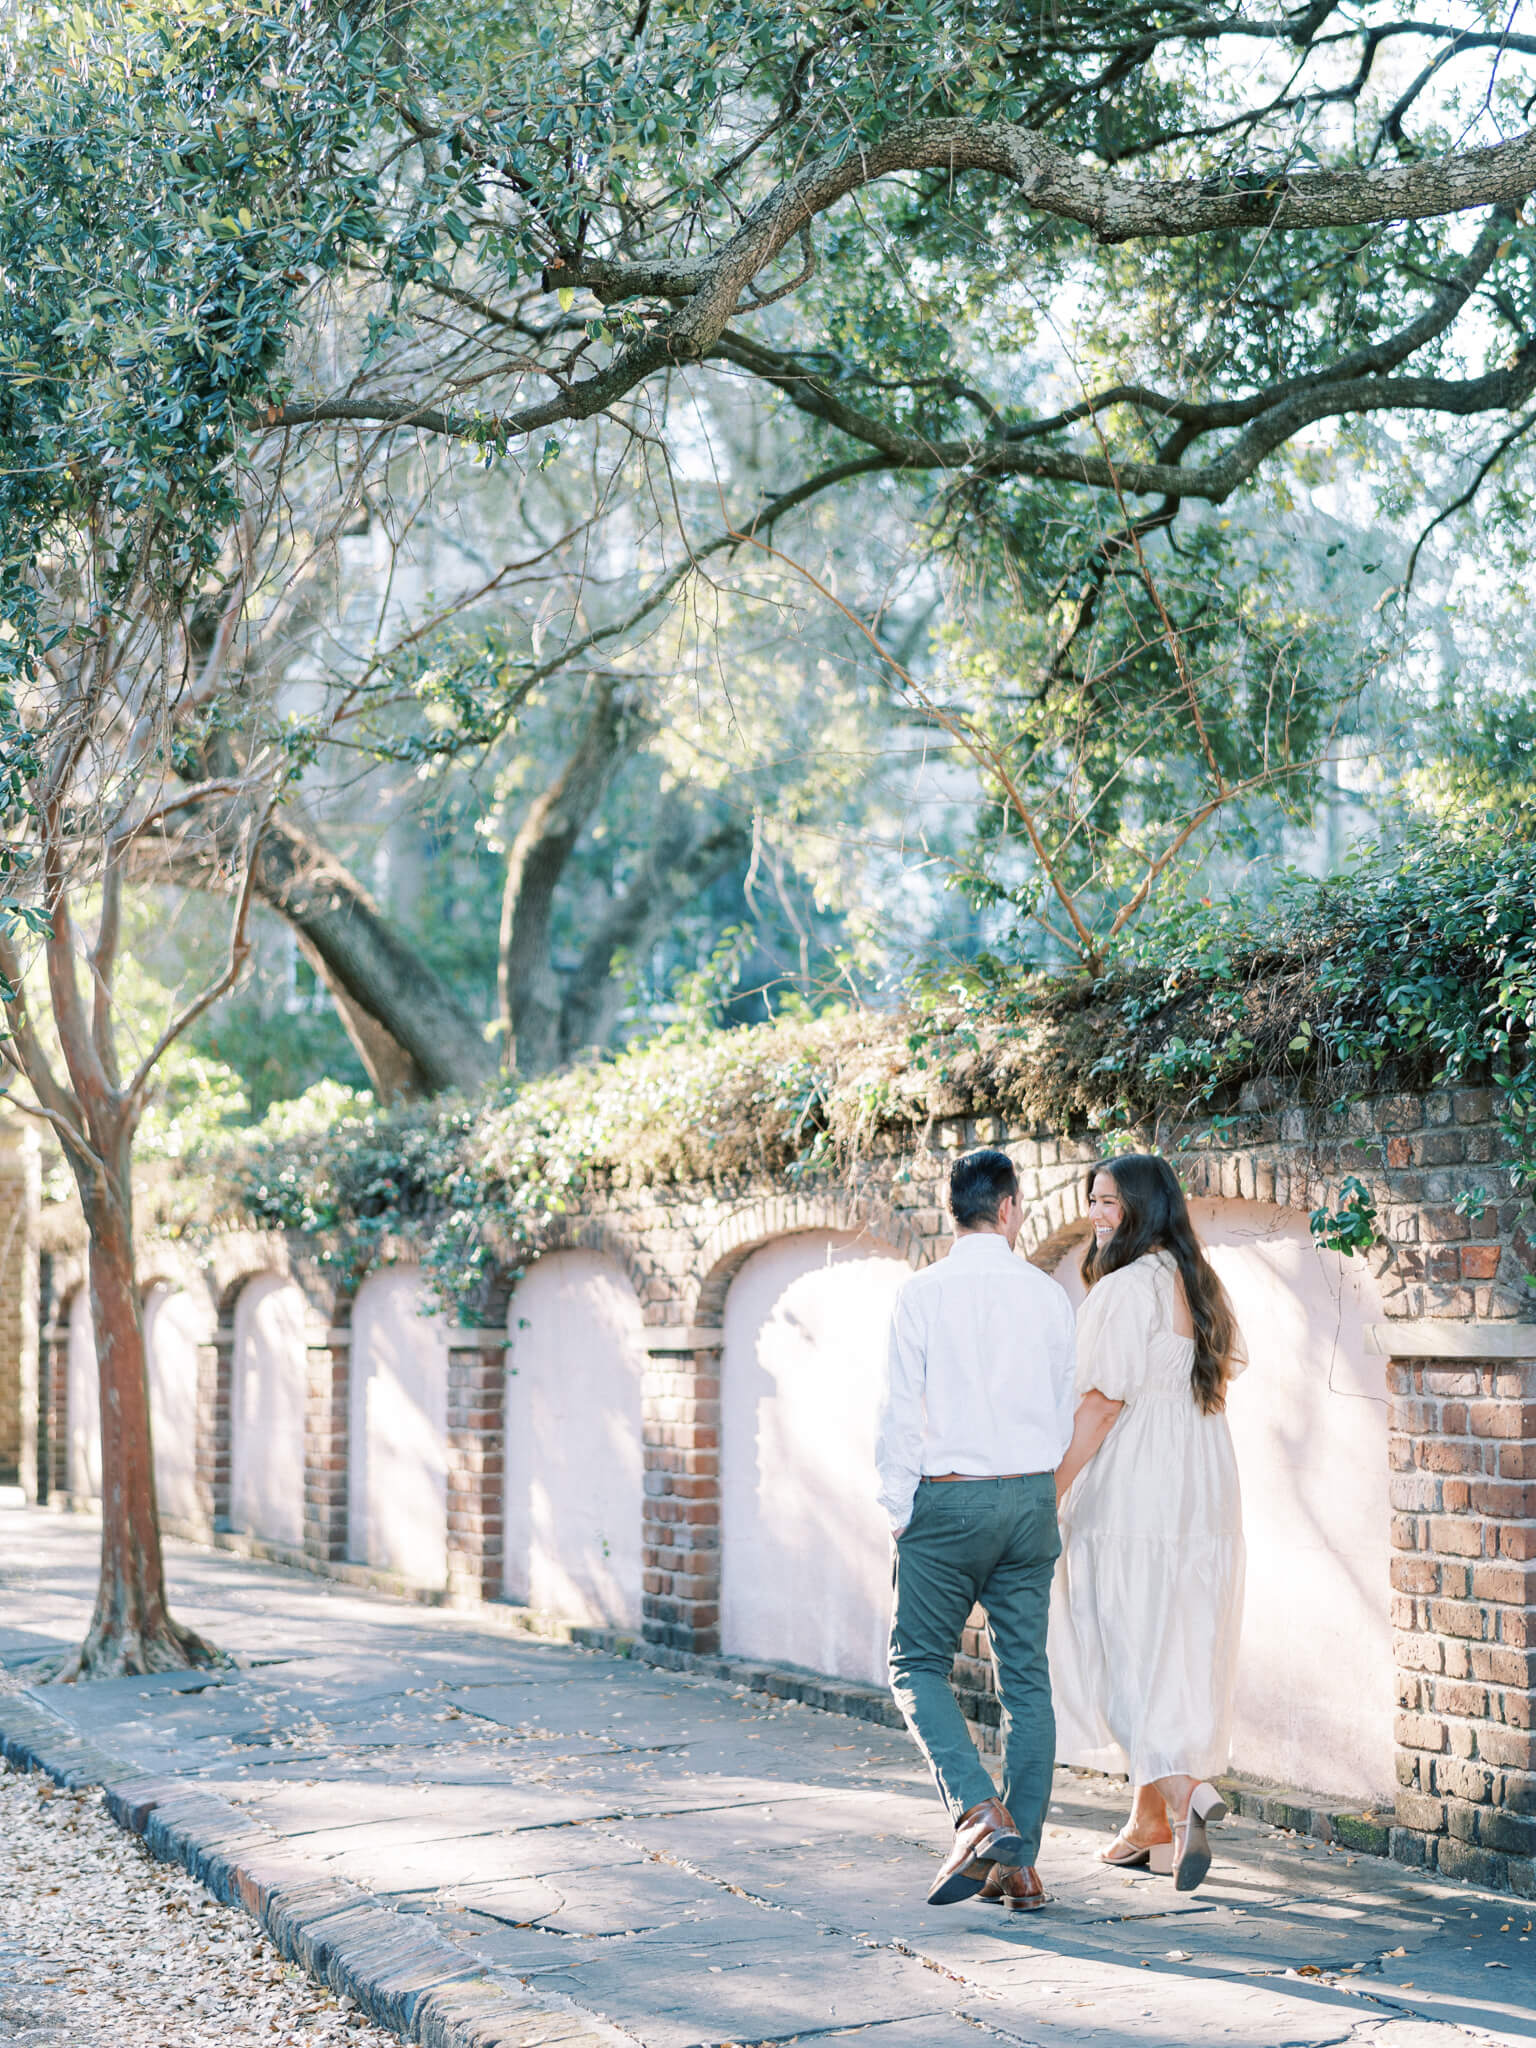 An engaged couple walking away with linked arms on Chalmer's Street with an old wall, greenery and trees surrounding them.